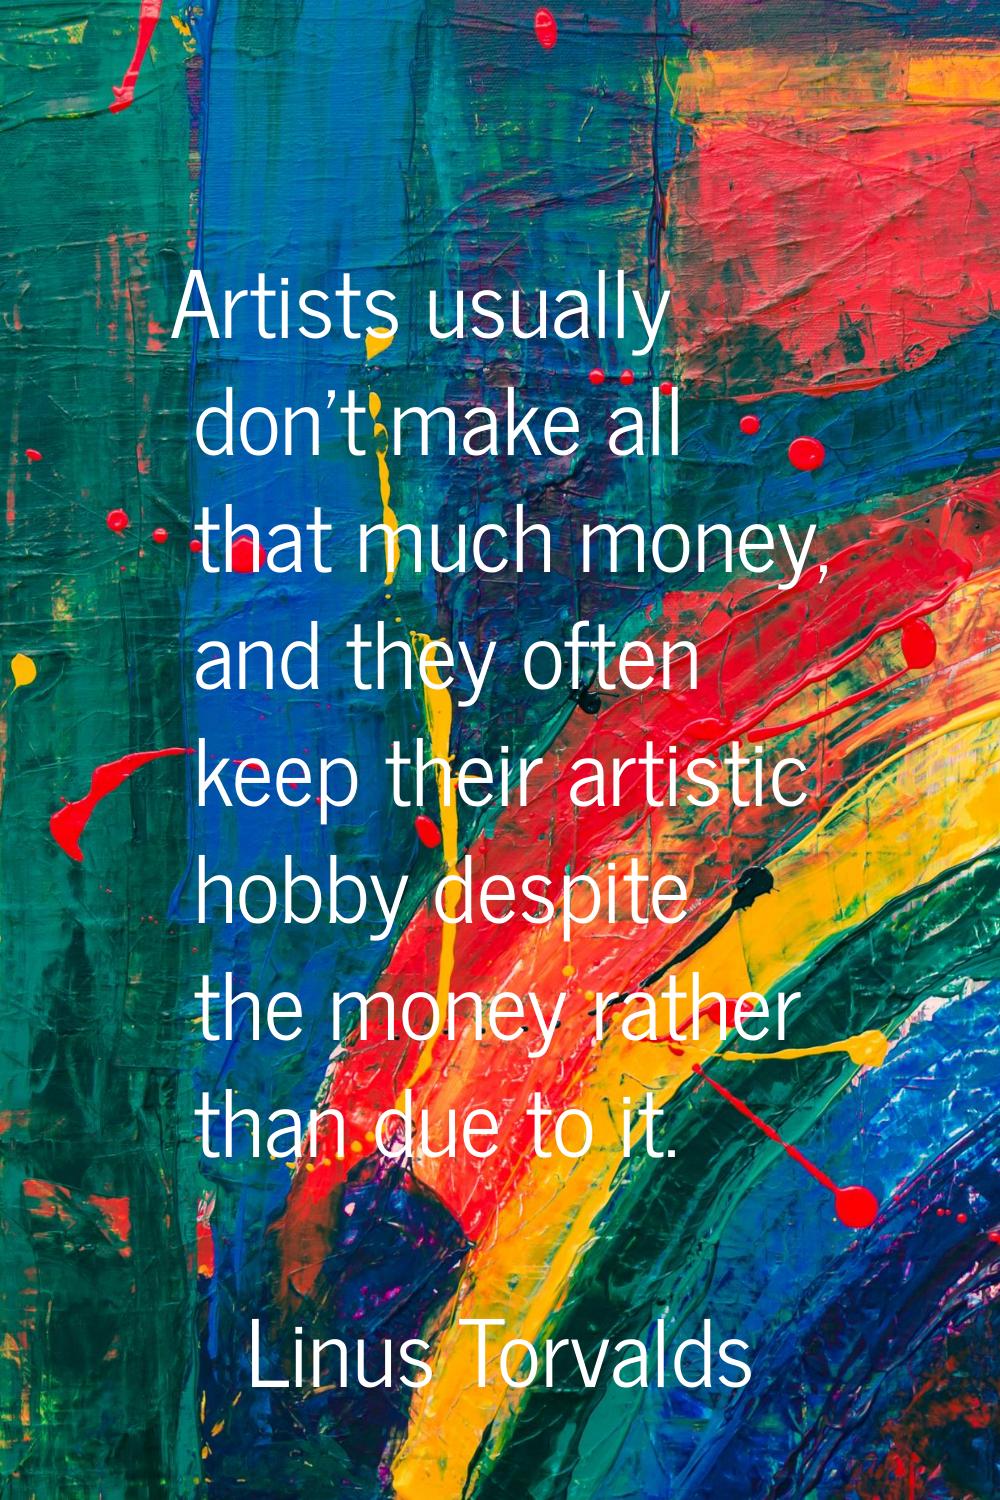 Artists usually don't make all that much money, and they often keep their artistic hobby despite th